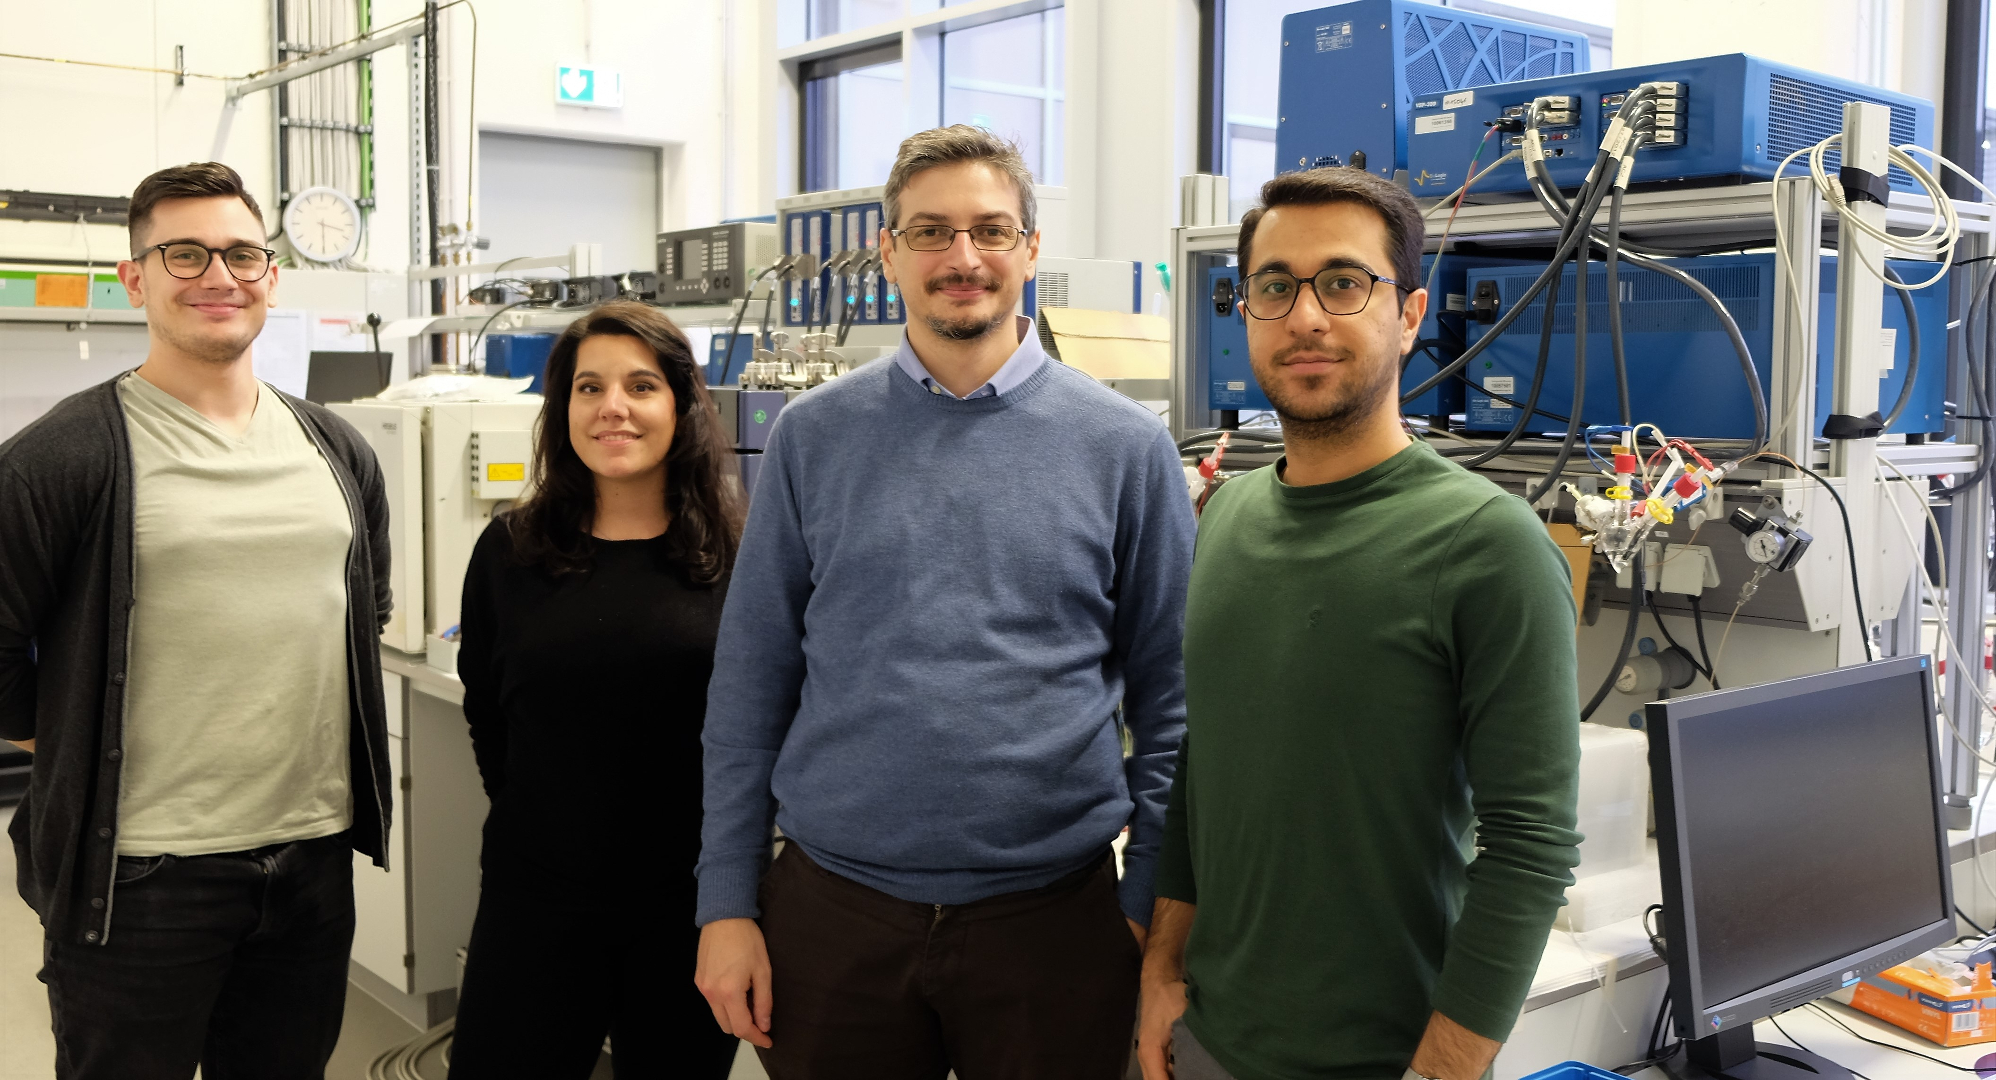 The group members currently working on the aqueous Zn-ion battery project financially supported by the German Federal Ministry of Education and Research (BMBF) with the project “ZIB” (FKZ 03XP0204A). From the right: Michele Tribbia, Dr. Giorgia Zampardi, Prof. Fabio La Mantia, Mohsen Baghodrat.